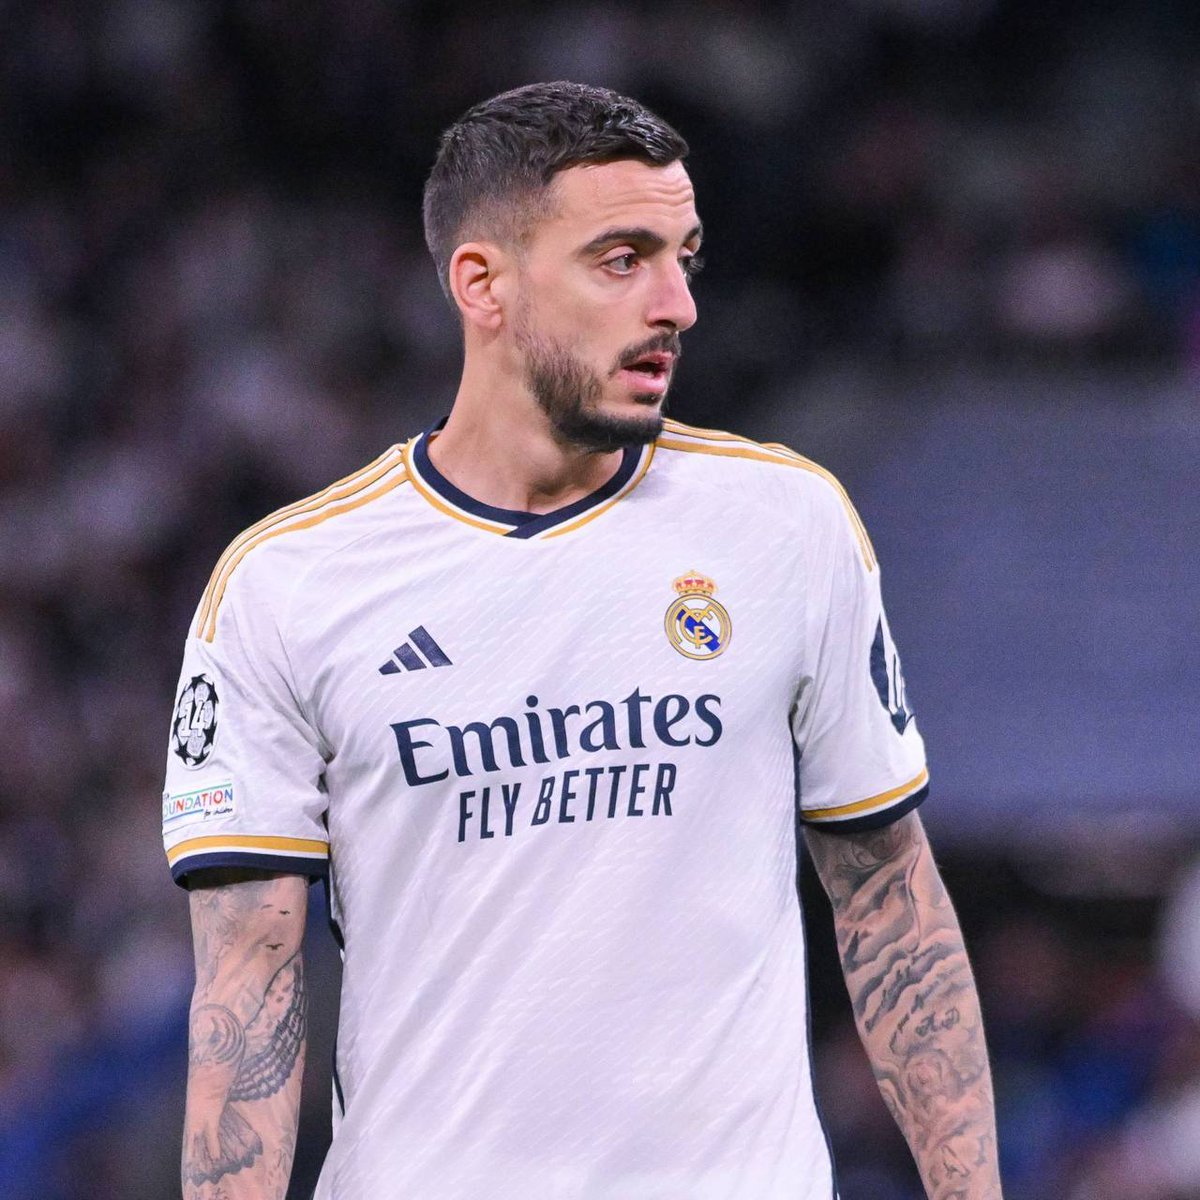 Joselu turning it round for Madrid with his first ever UCL goals⚽⚽

#championsleague #UCL 

 #RMAFCB